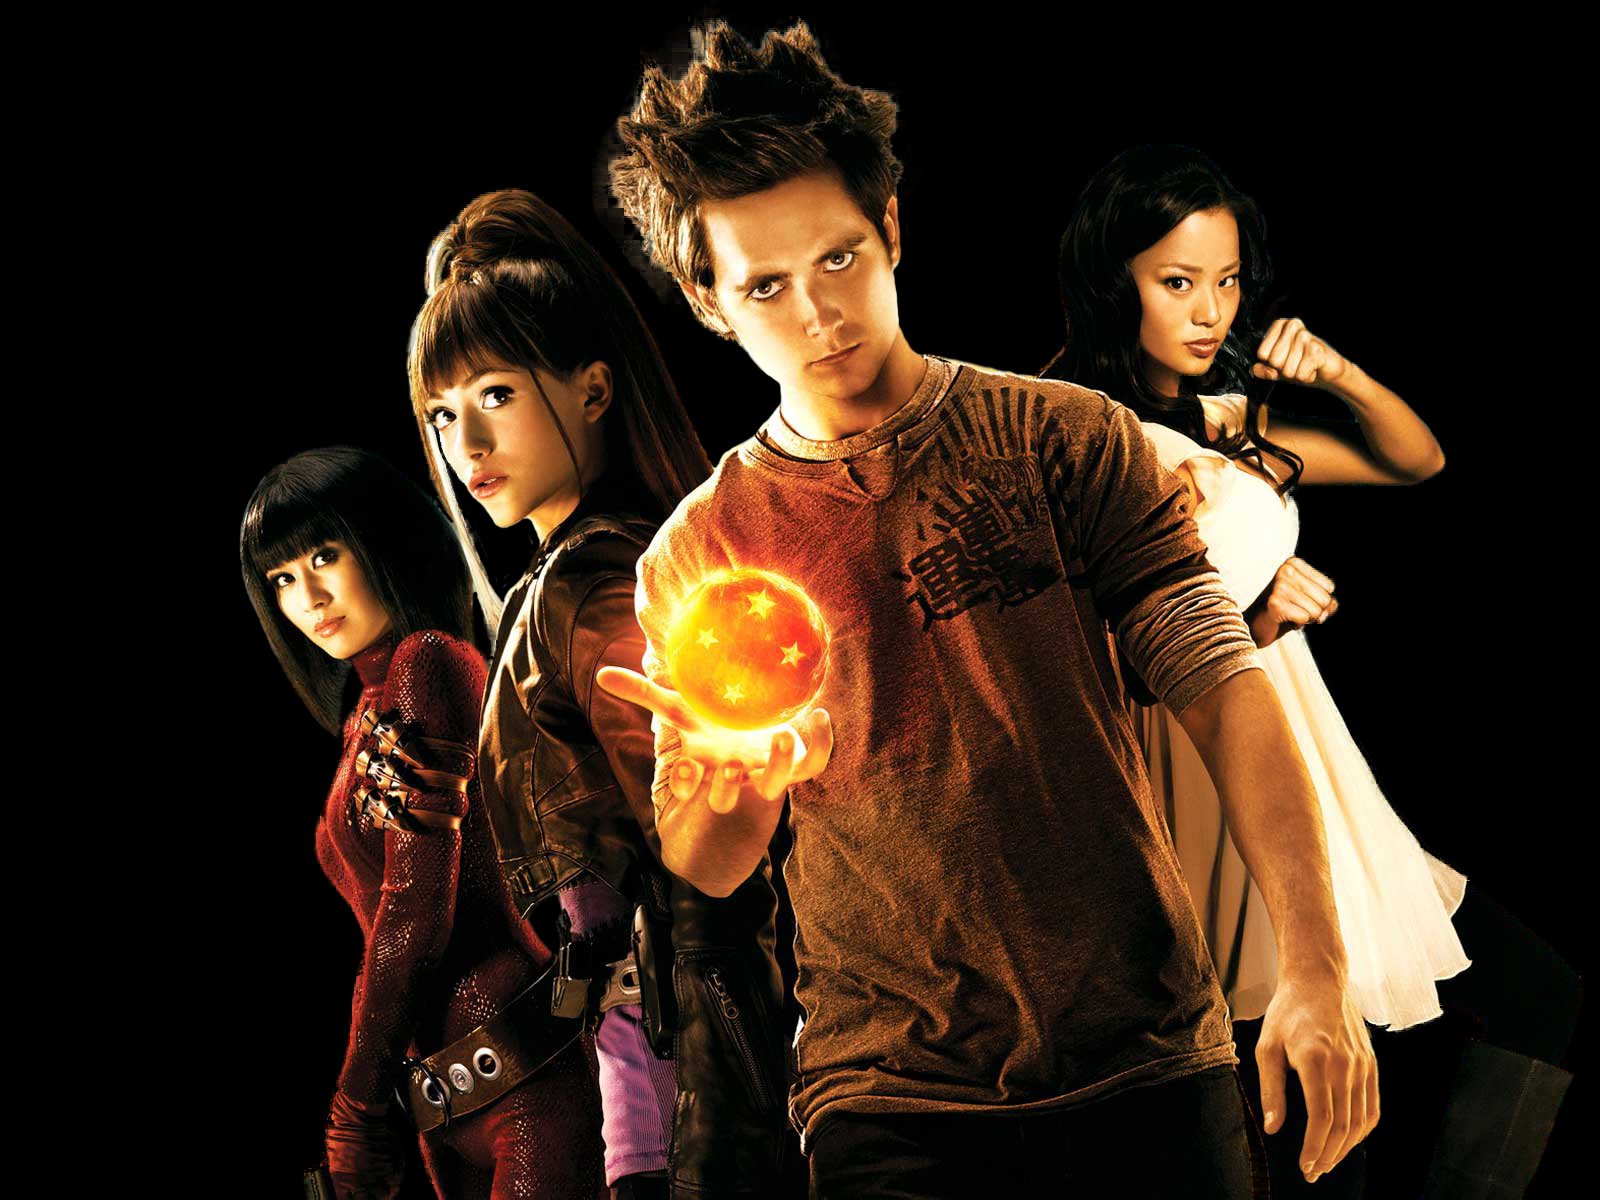 dragonball-evolution-action-adventure-fantasy-martial-game-anime-1-wallpapers-hd